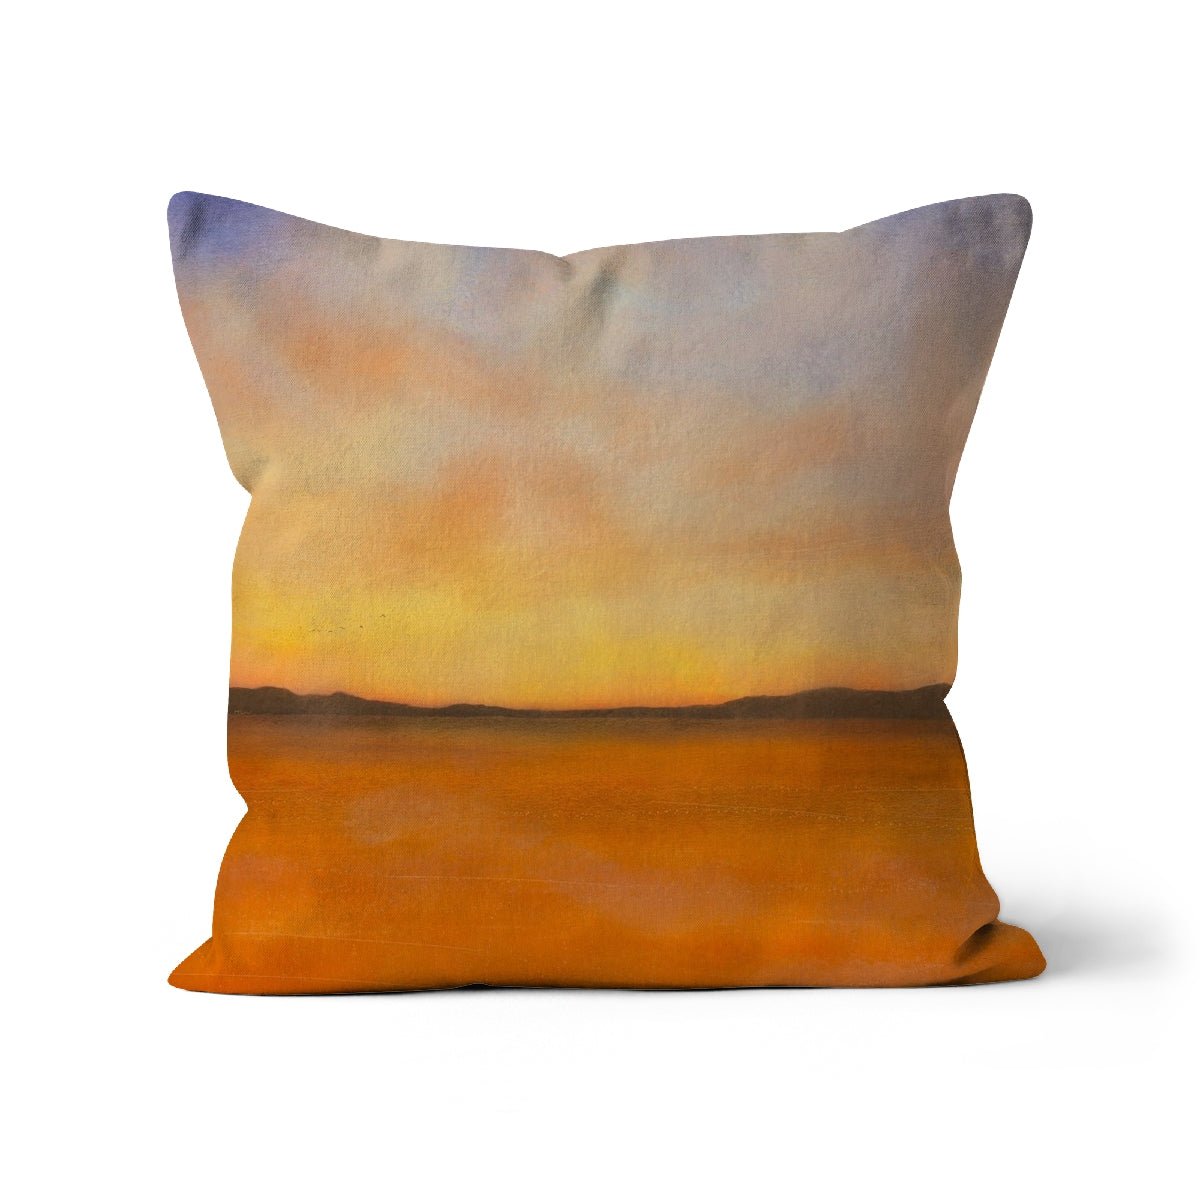 Islay Dawn Art Gifts Cushion-Cushions-Hebridean Islands Art Gallery-Faux Suede-22"x22"-Paintings, Prints, Homeware, Art Gifts From Scotland By Scottish Artist Kevin Hunter